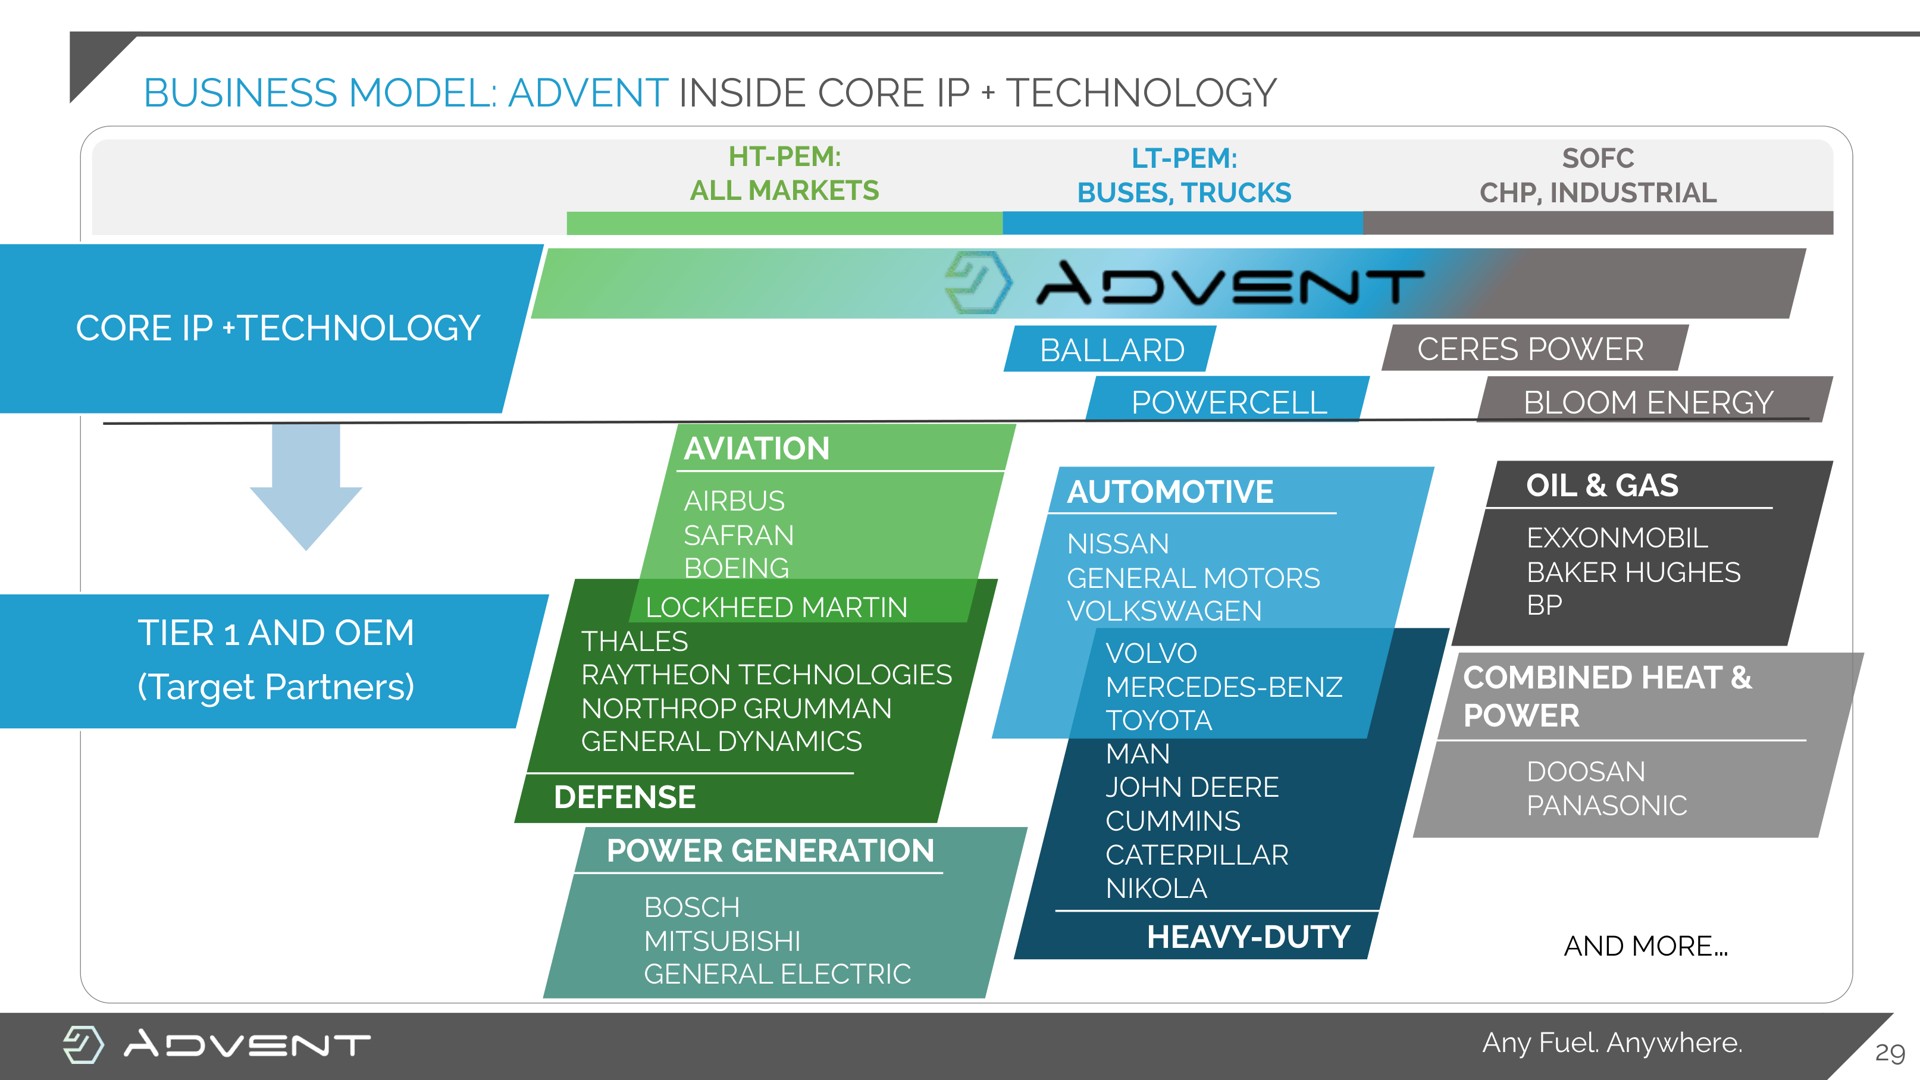 business model inside core technology core technology tier and target partners martin aes learn general dynamics our combined heat | Advent